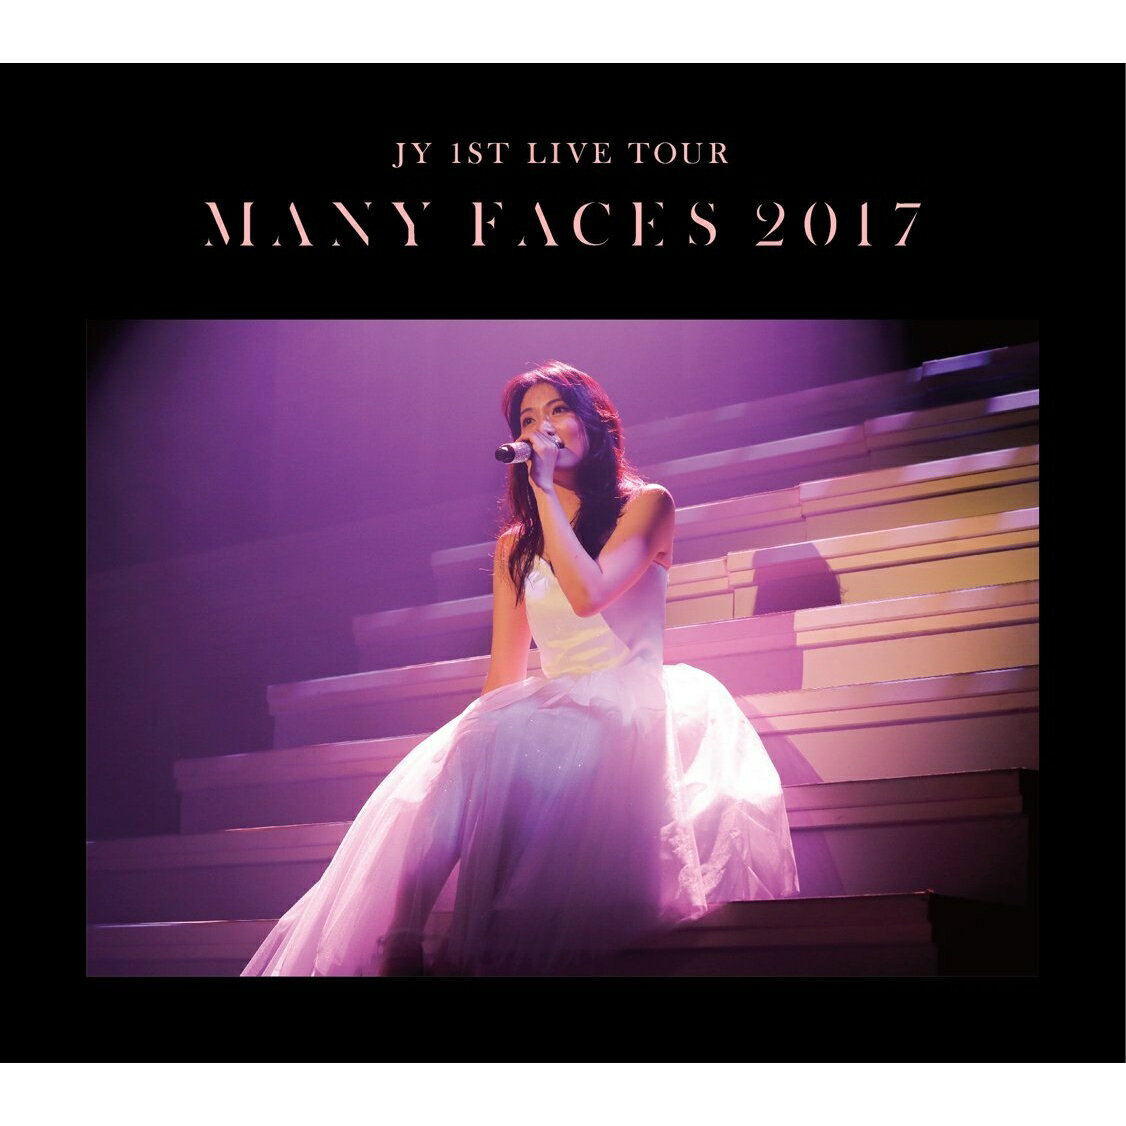 JY 1st LIVE TOUR “Many Faces 2017”(初回生産限定盤)【Blu-ray】 [ JY ]